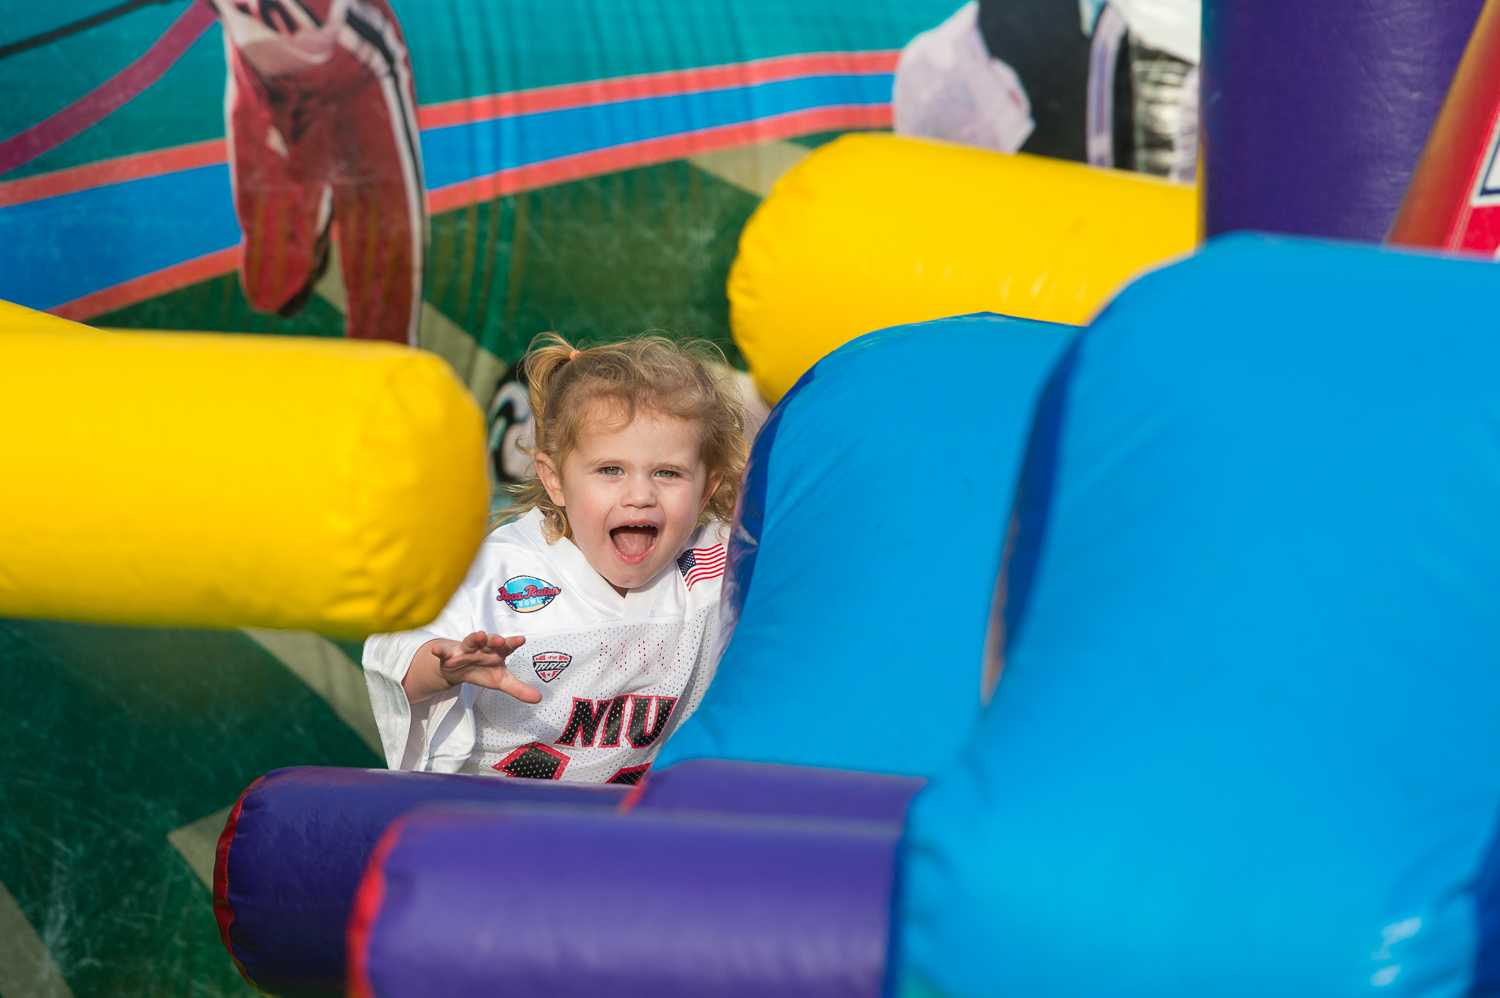 During the pre-game festivities outside of FAU Stadium, Morgan Harmon runs through an inflatable football game.  The Harmon family traveled to Boca Raton from DeKalb, Illinois to cheer on the Huskies. 